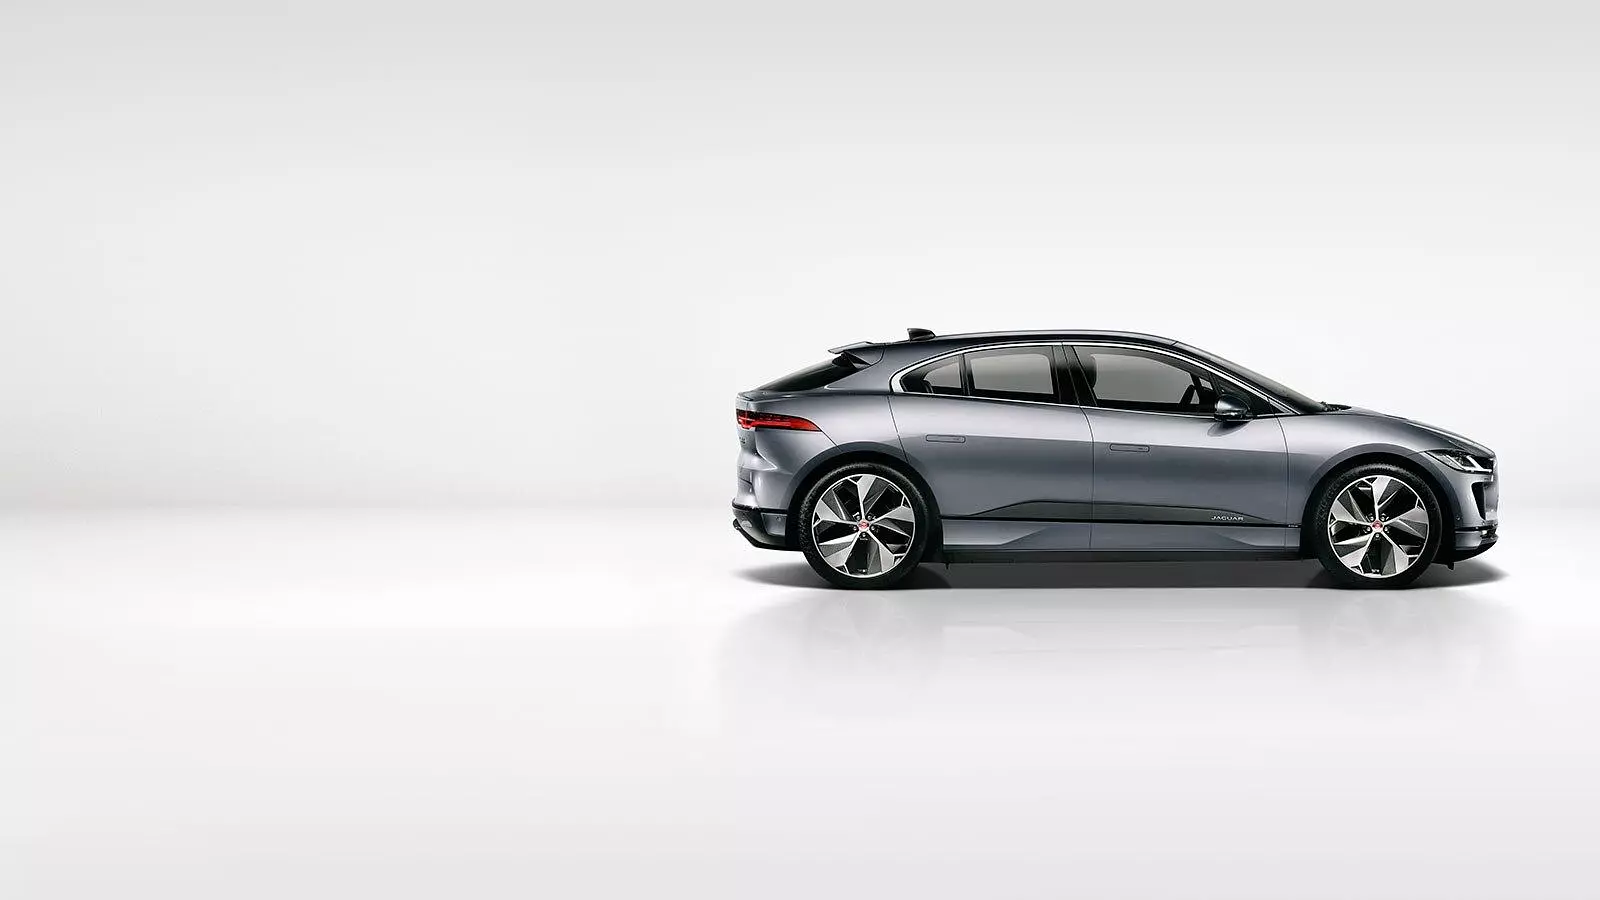 i-pace 100% electric